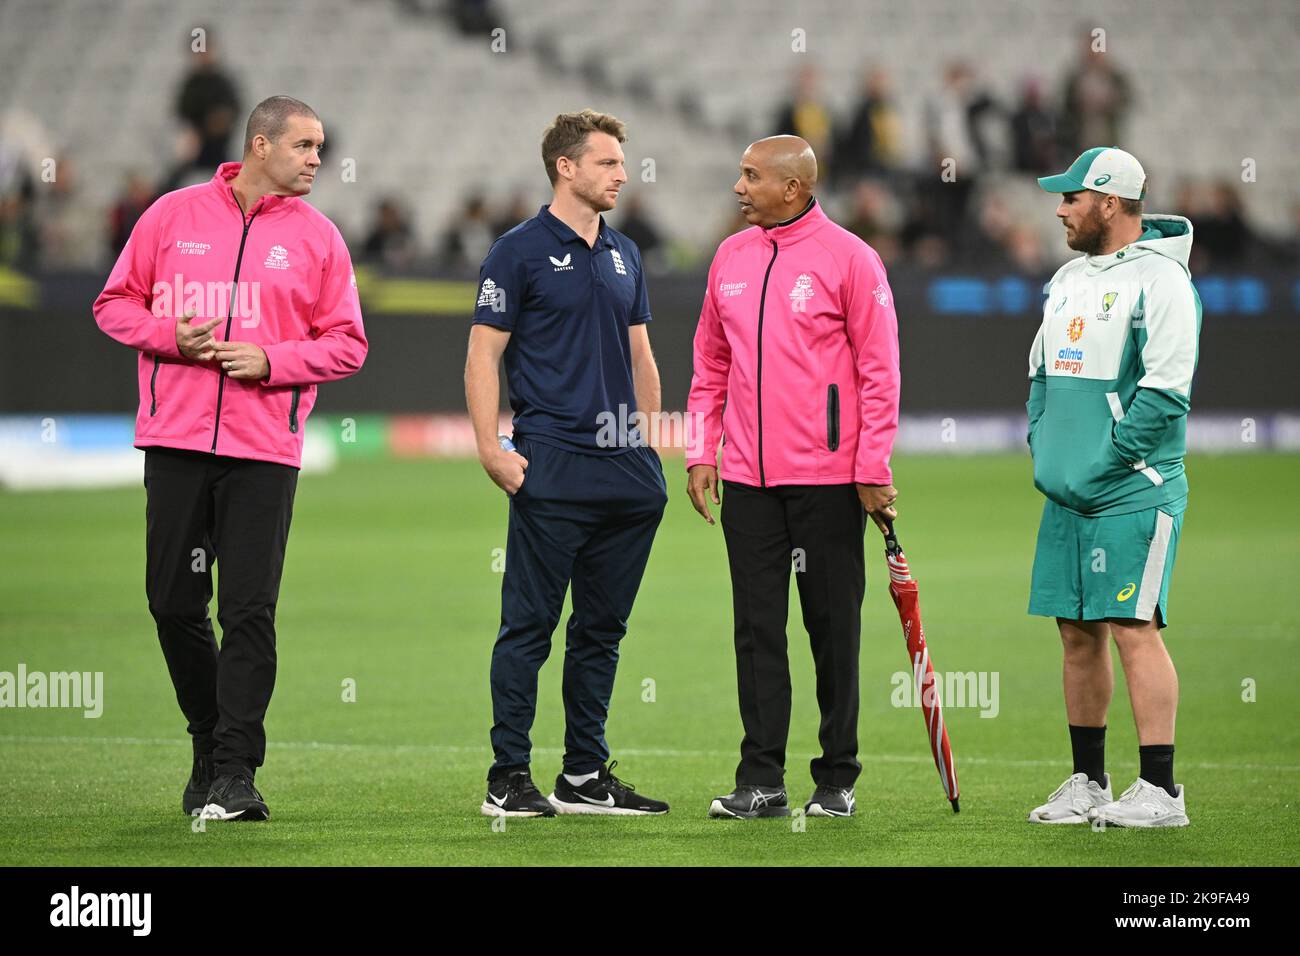 England's Jos Buttler (second left) and Australia's Aaron Finch (right) speak with match officials ahead of the T20 World Cup Super 12 match at Melbourne Cricket Ground in Melbourne, Australia. Picture date: Friday October 28, 2022. Stock Photo